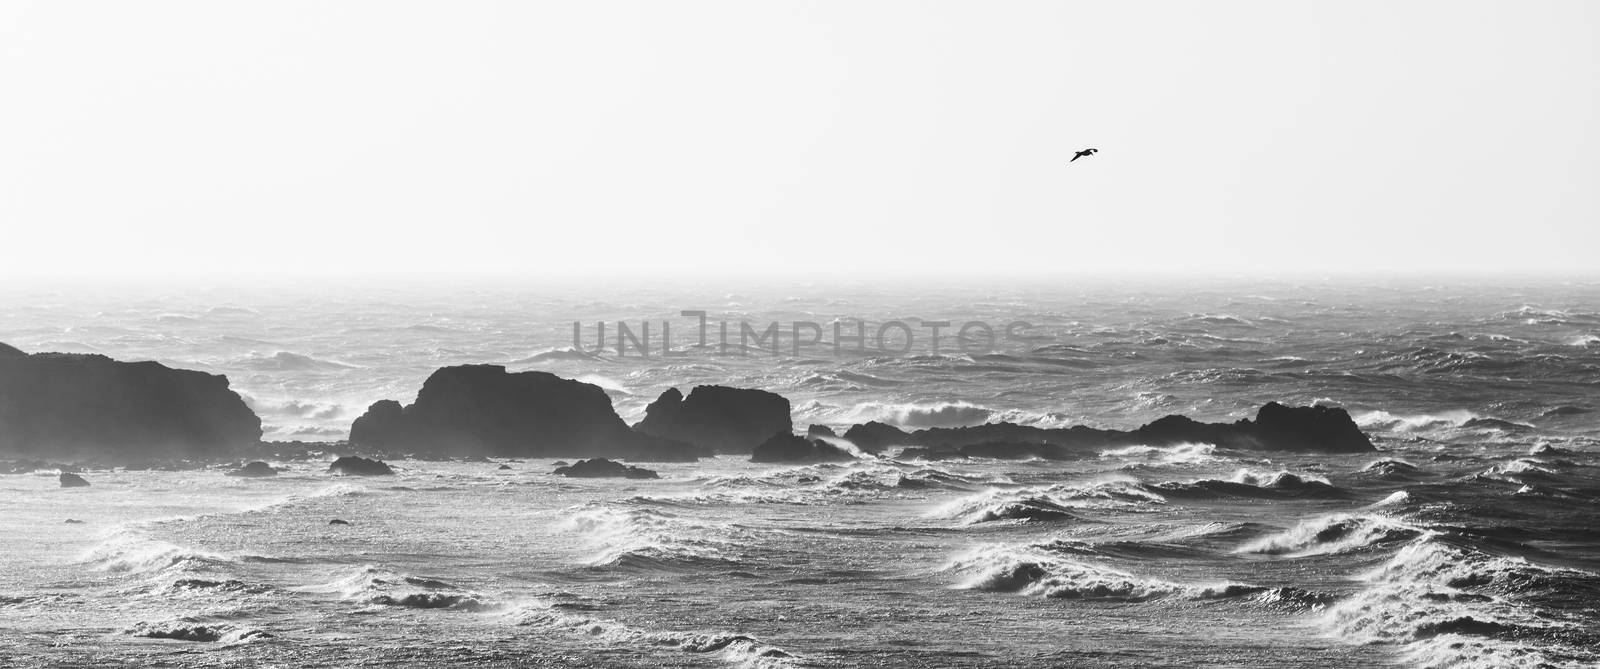 Panoramic view of rough sea in black and white, one seagull flying in the sky. Coastal landscape with rocks and ocean.